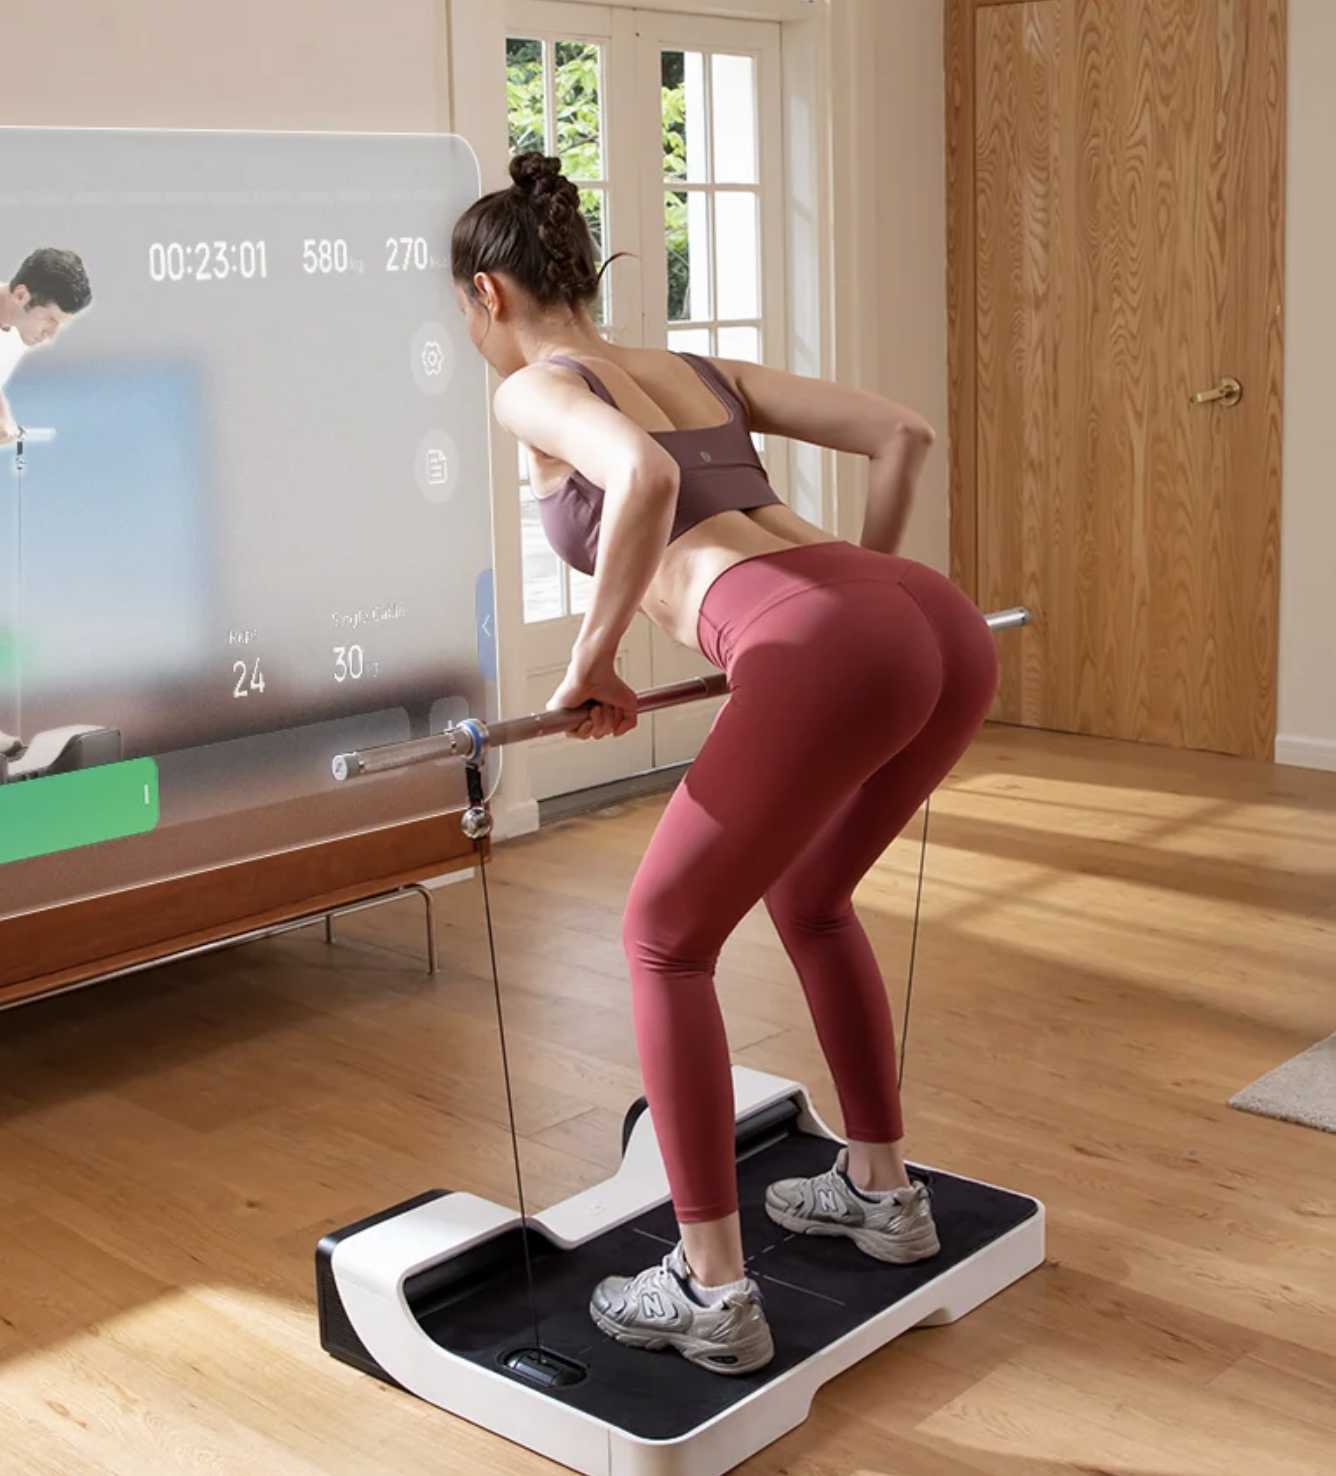 Woman exercising with a smart fitness machine at home.